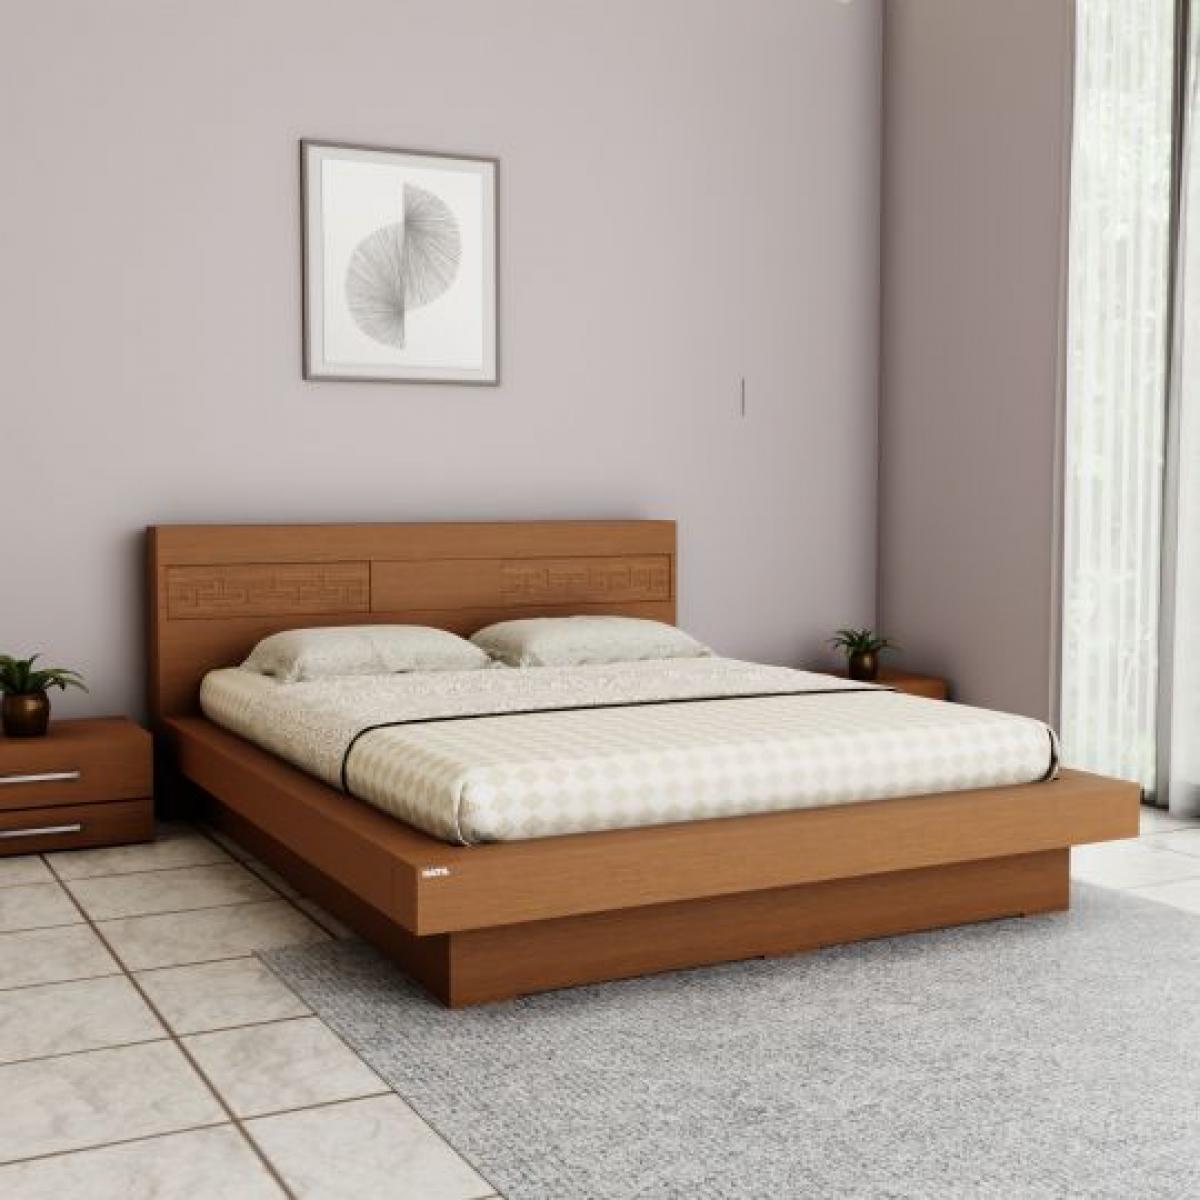 Queen Size Bed | Queen Size Bed Price in India | Hatil